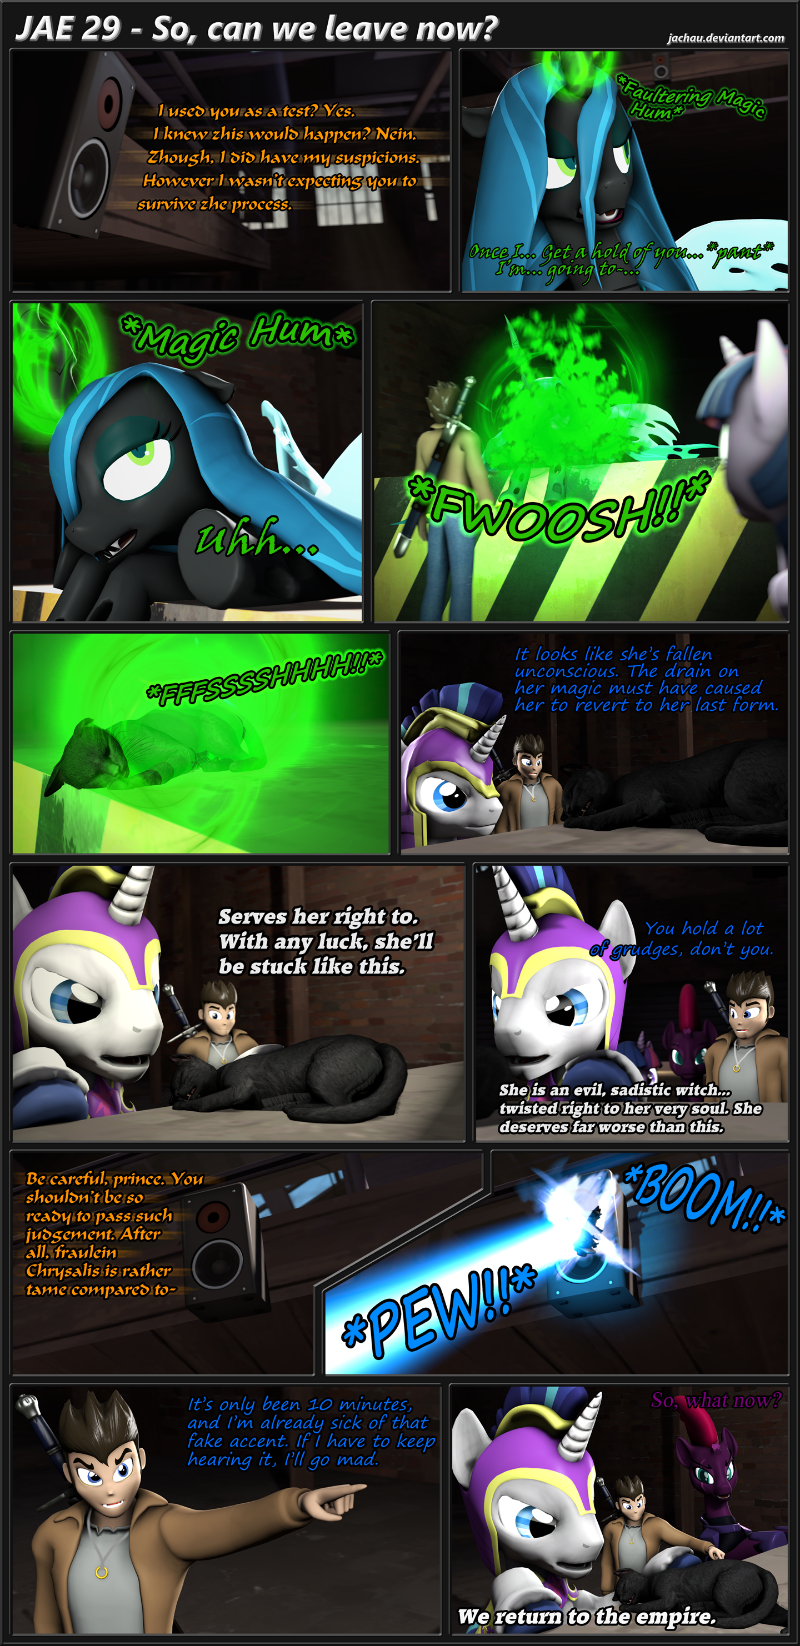 Page 29 - So, can we leave now?